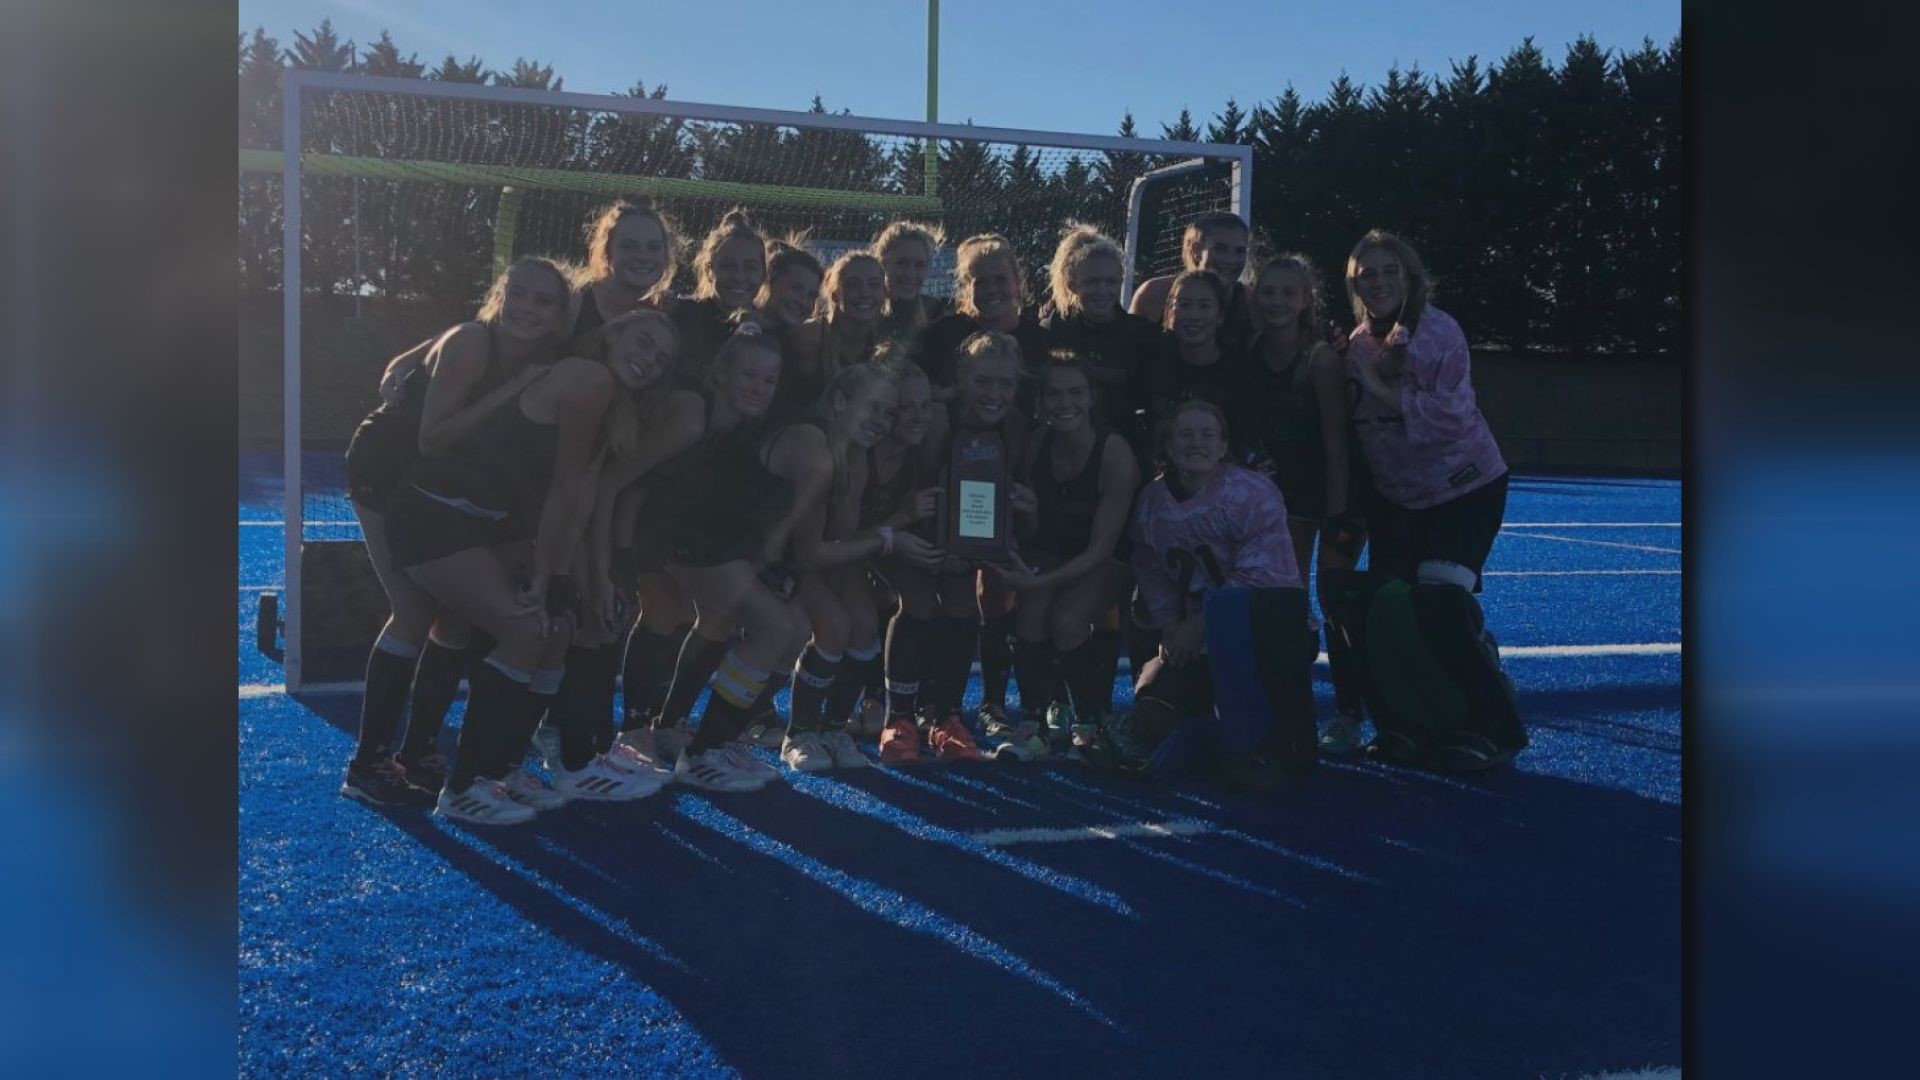 The Falcons won their 4th straight field hockey championship and 23rd overall in school history.